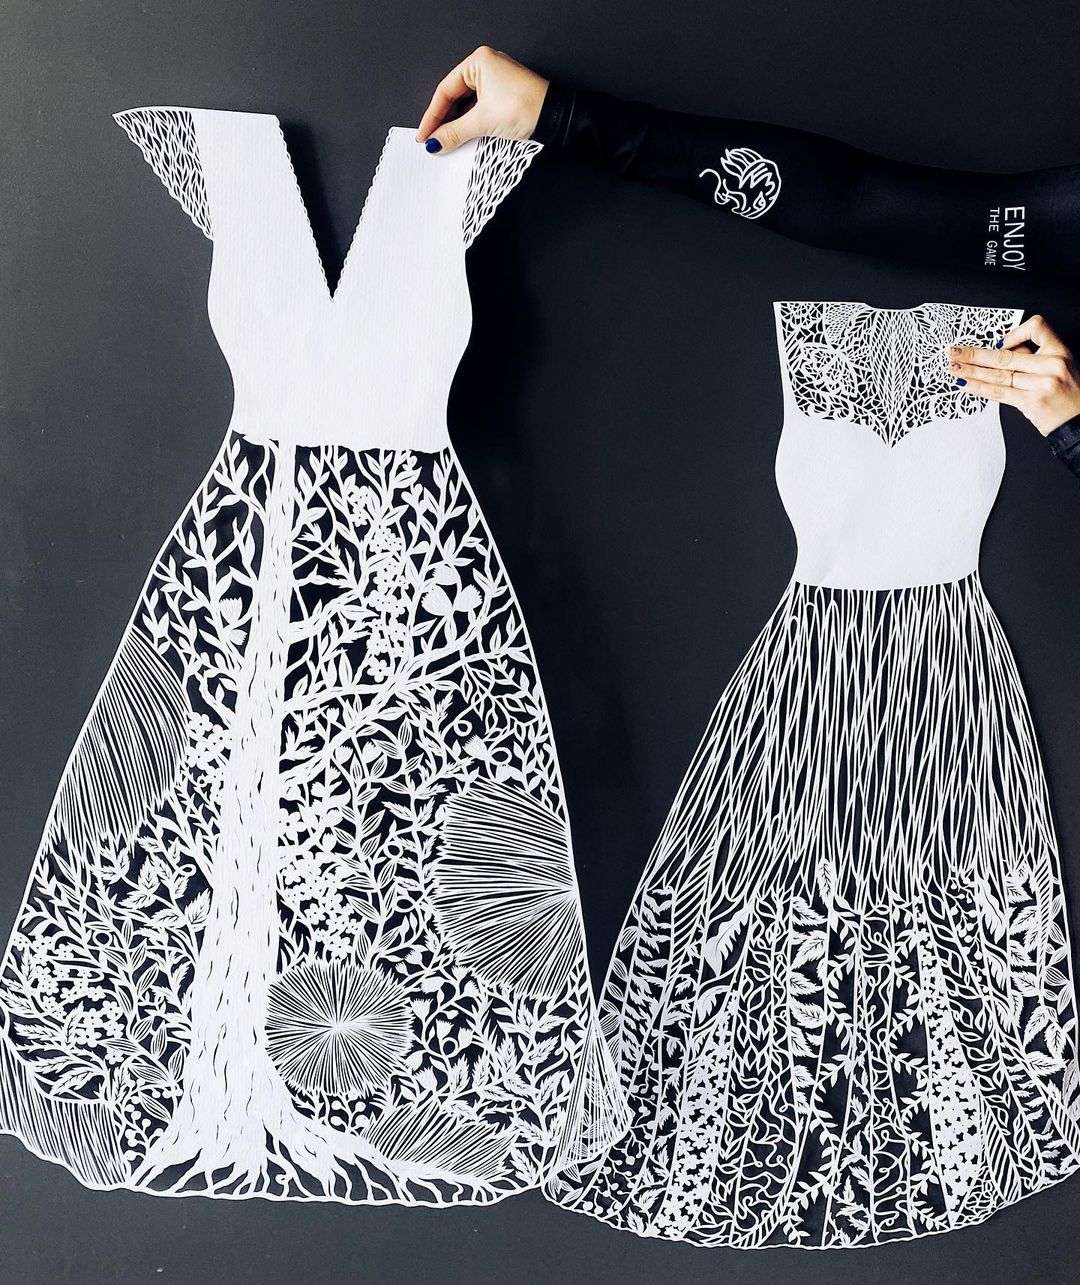 Artist transforms ordinary paper into the exquisite patterned dresses